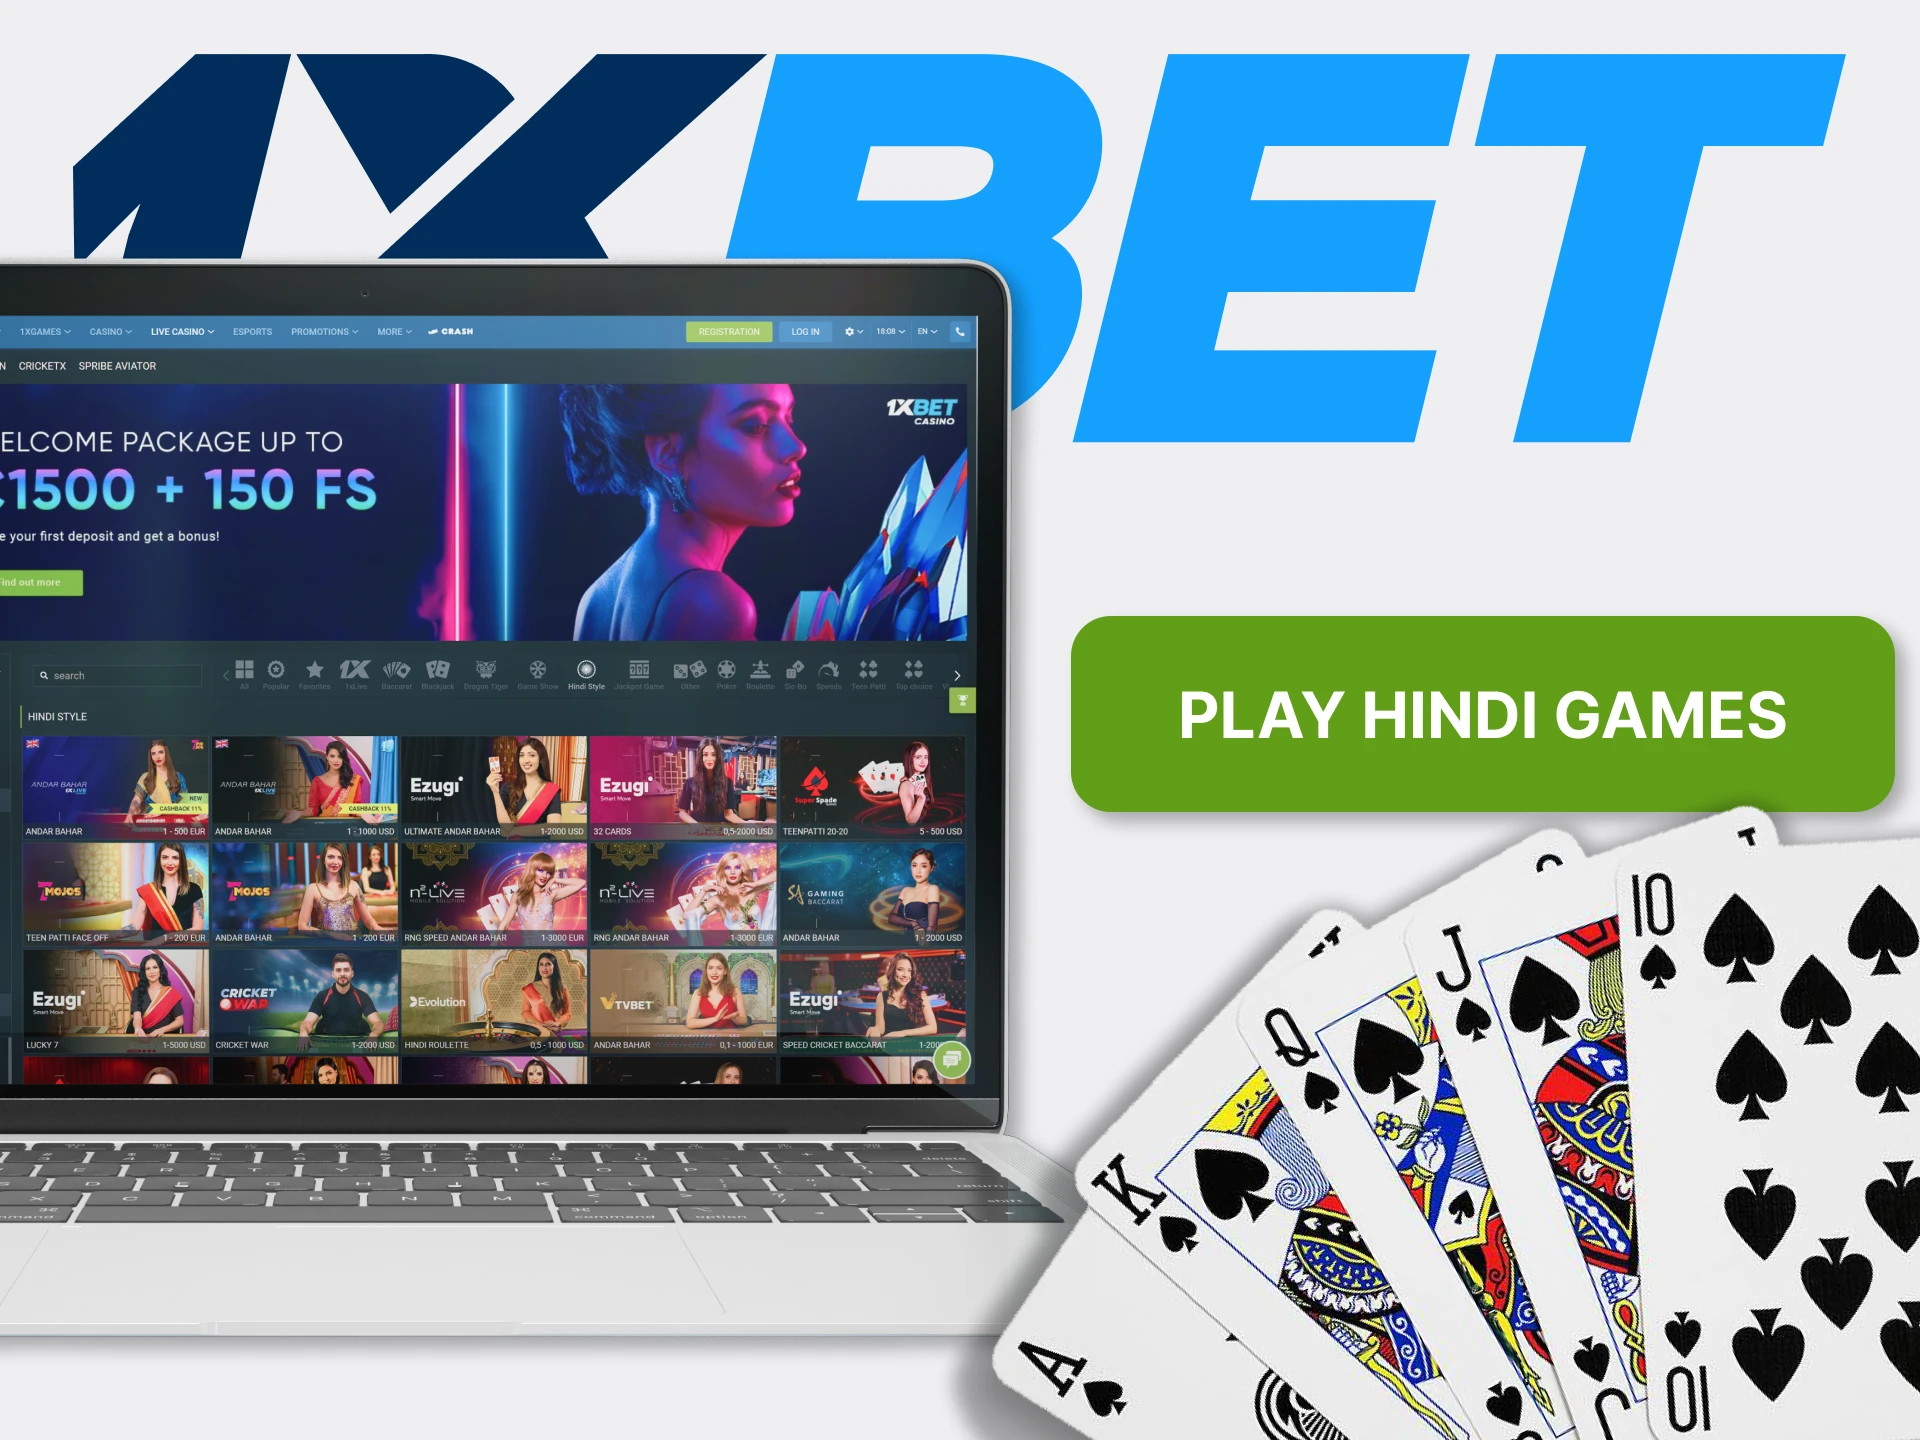 At 1xBet there are many games available that are loved in India.